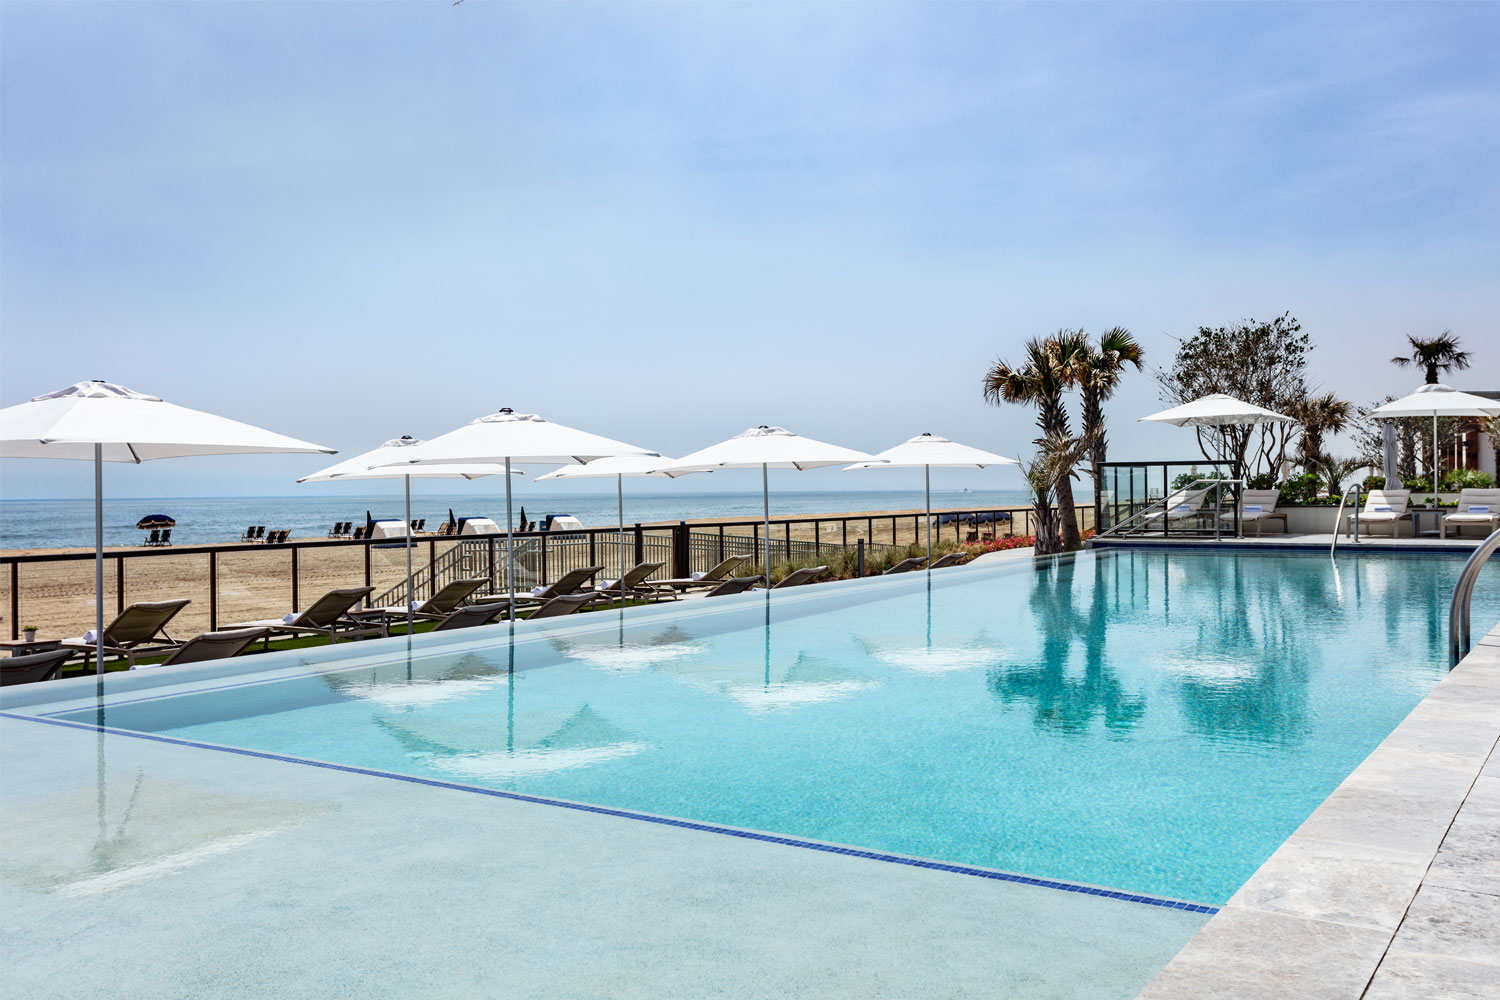 A view of the outdoor pool at the Marriott Virginia Beach Oceanfront Resort